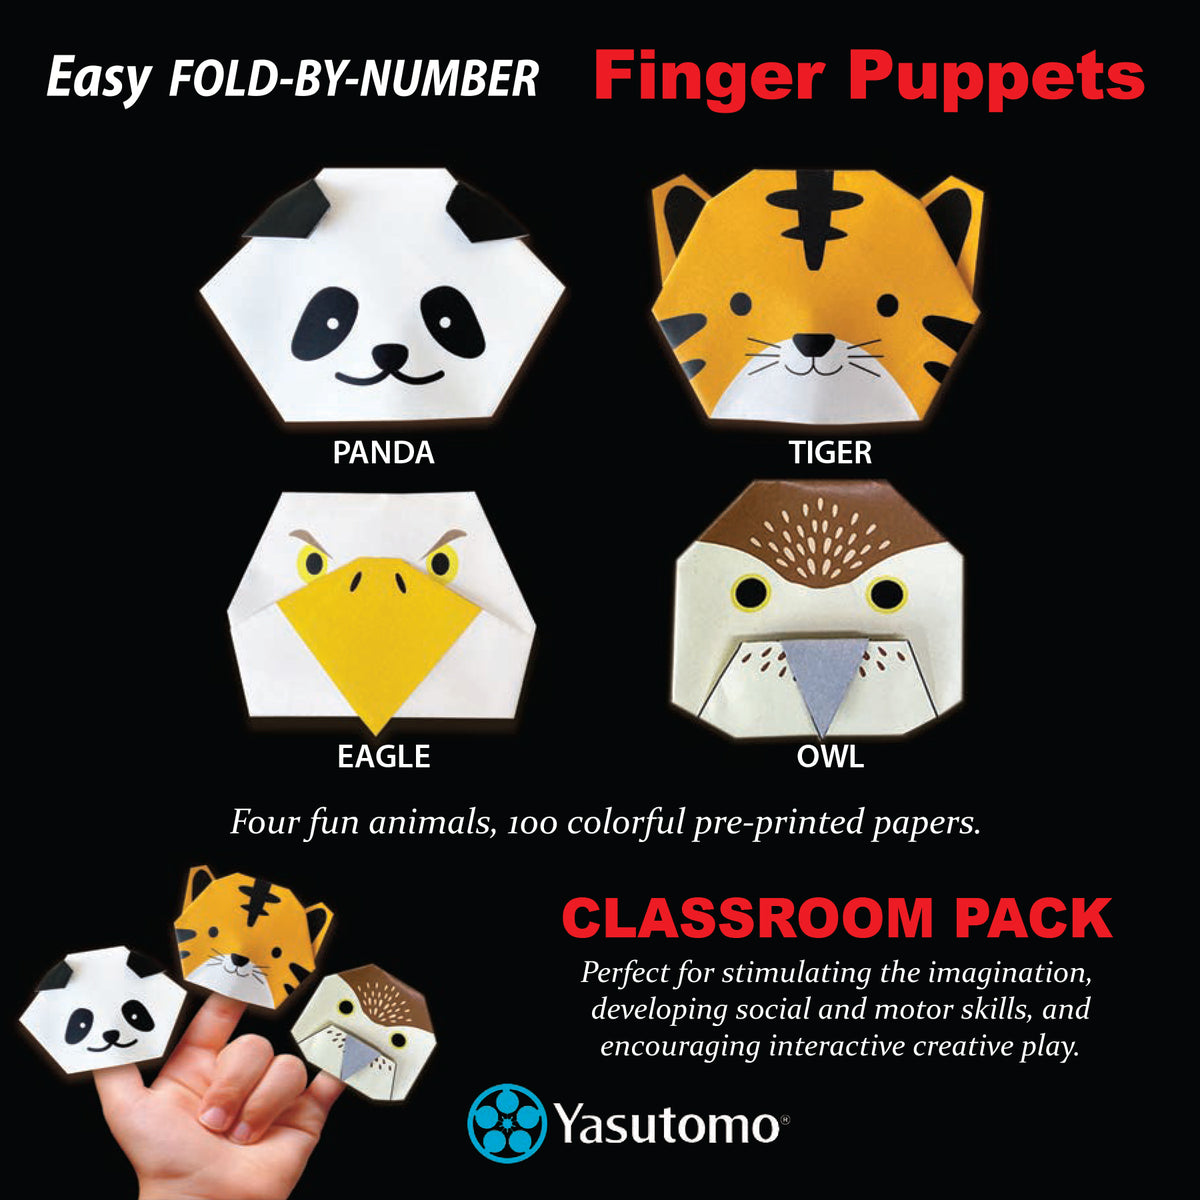 Origami Fold-by-Number Finger Puppets - A2Z Science & Learning Toy